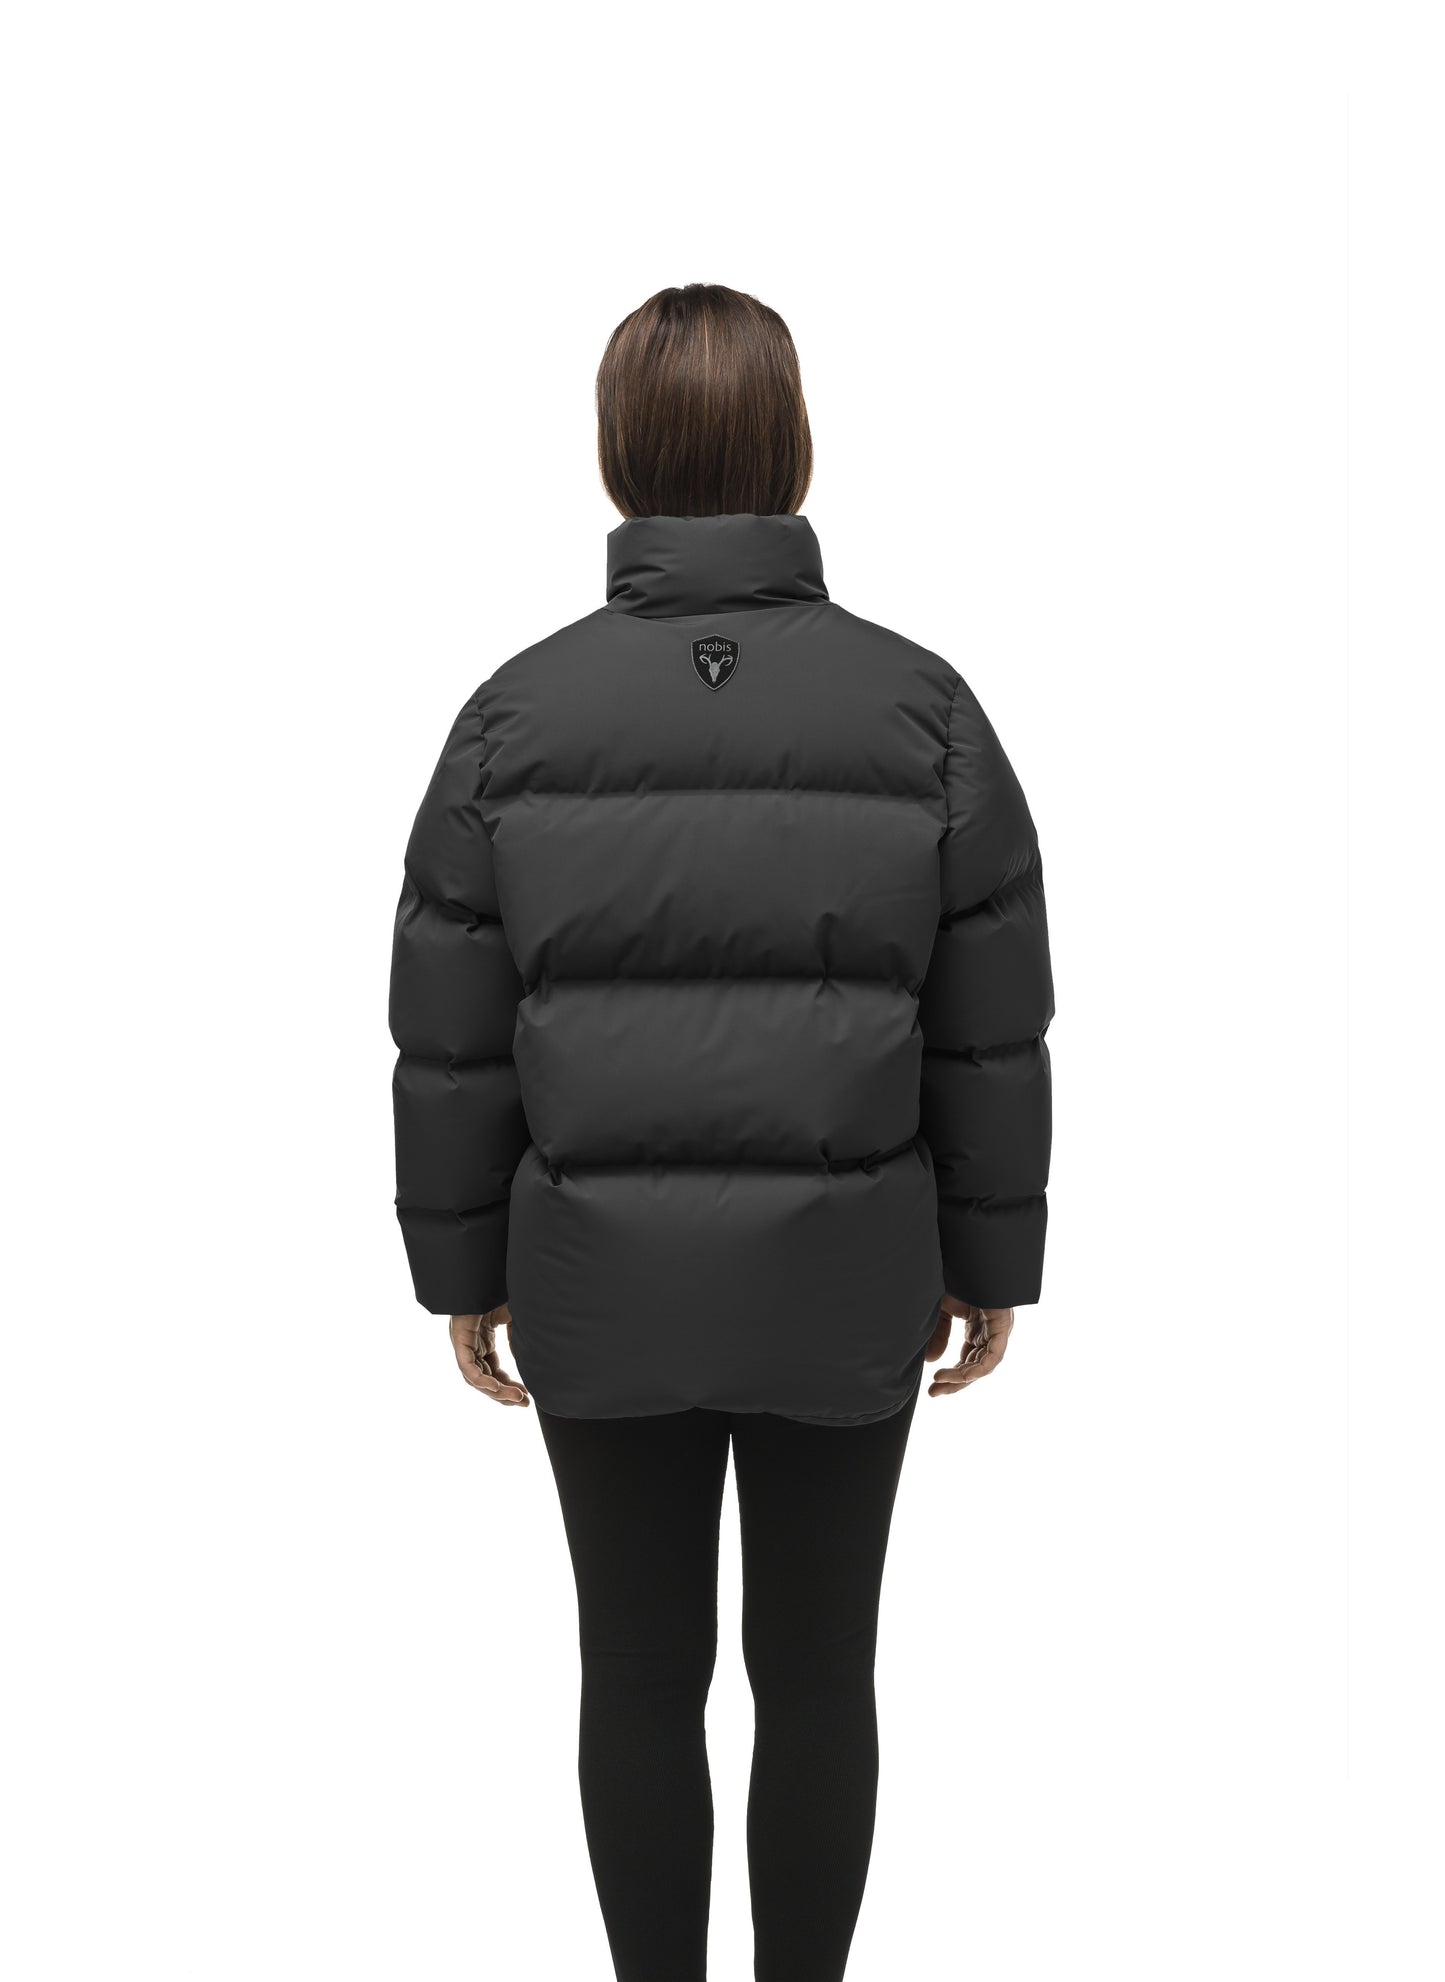 Women's puffer jacket with a minimalist modern design; featuring graphic details like oversized tonal branding, an exposed zipper, and seamless puffer channels to lock in the Premium Canadian Origin White Duck Down in Black